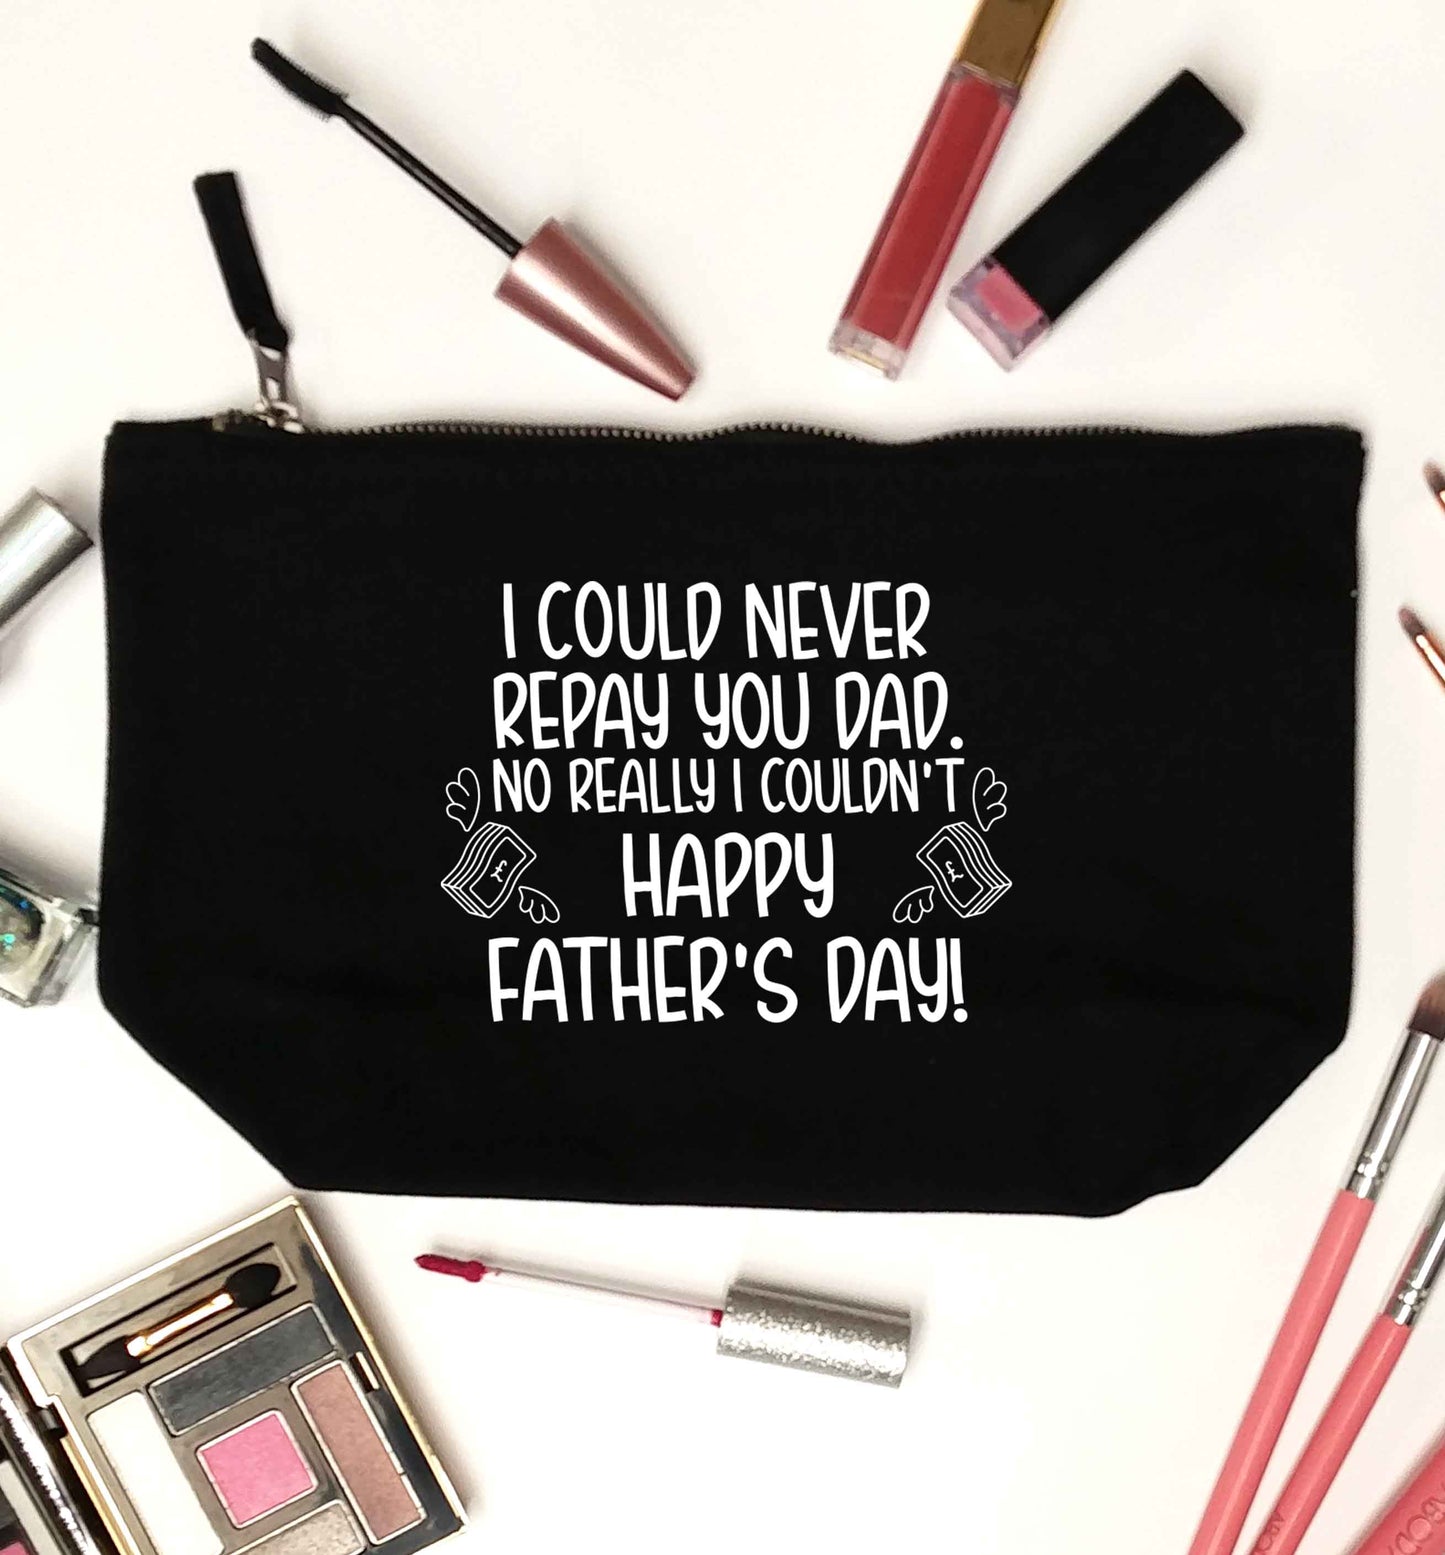 I could never repay you dad. No I really couldn't happy Father's day! black makeup bag